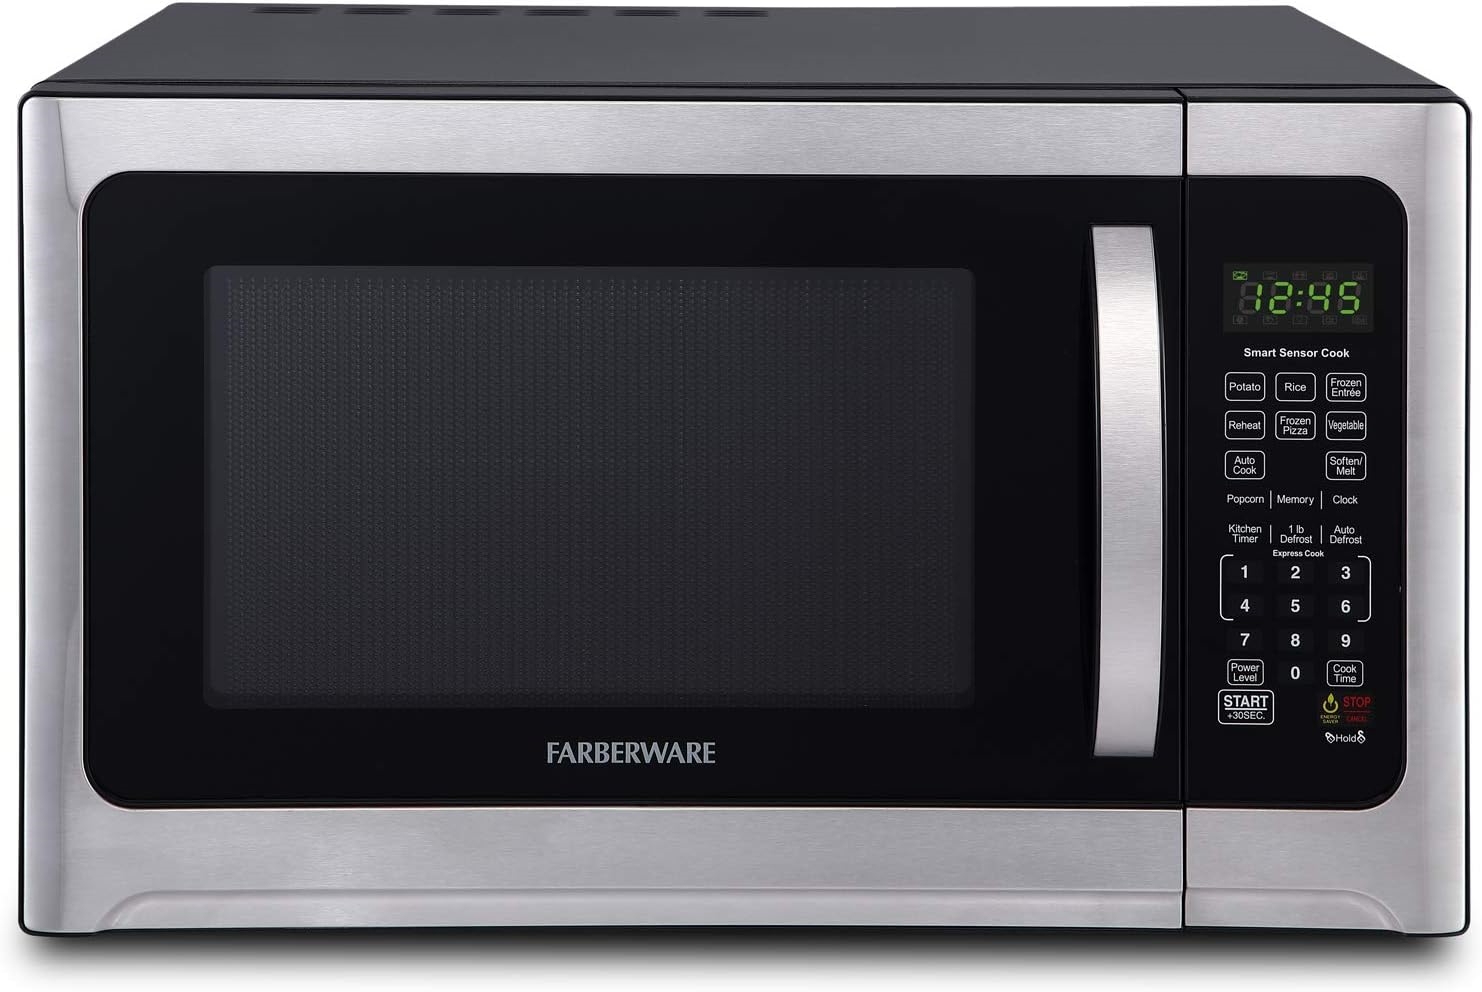 https://www.devicedaily.com/wp-content/uploads/2023/07/11-Best-Microwave-Under-100-in-2023.jpg